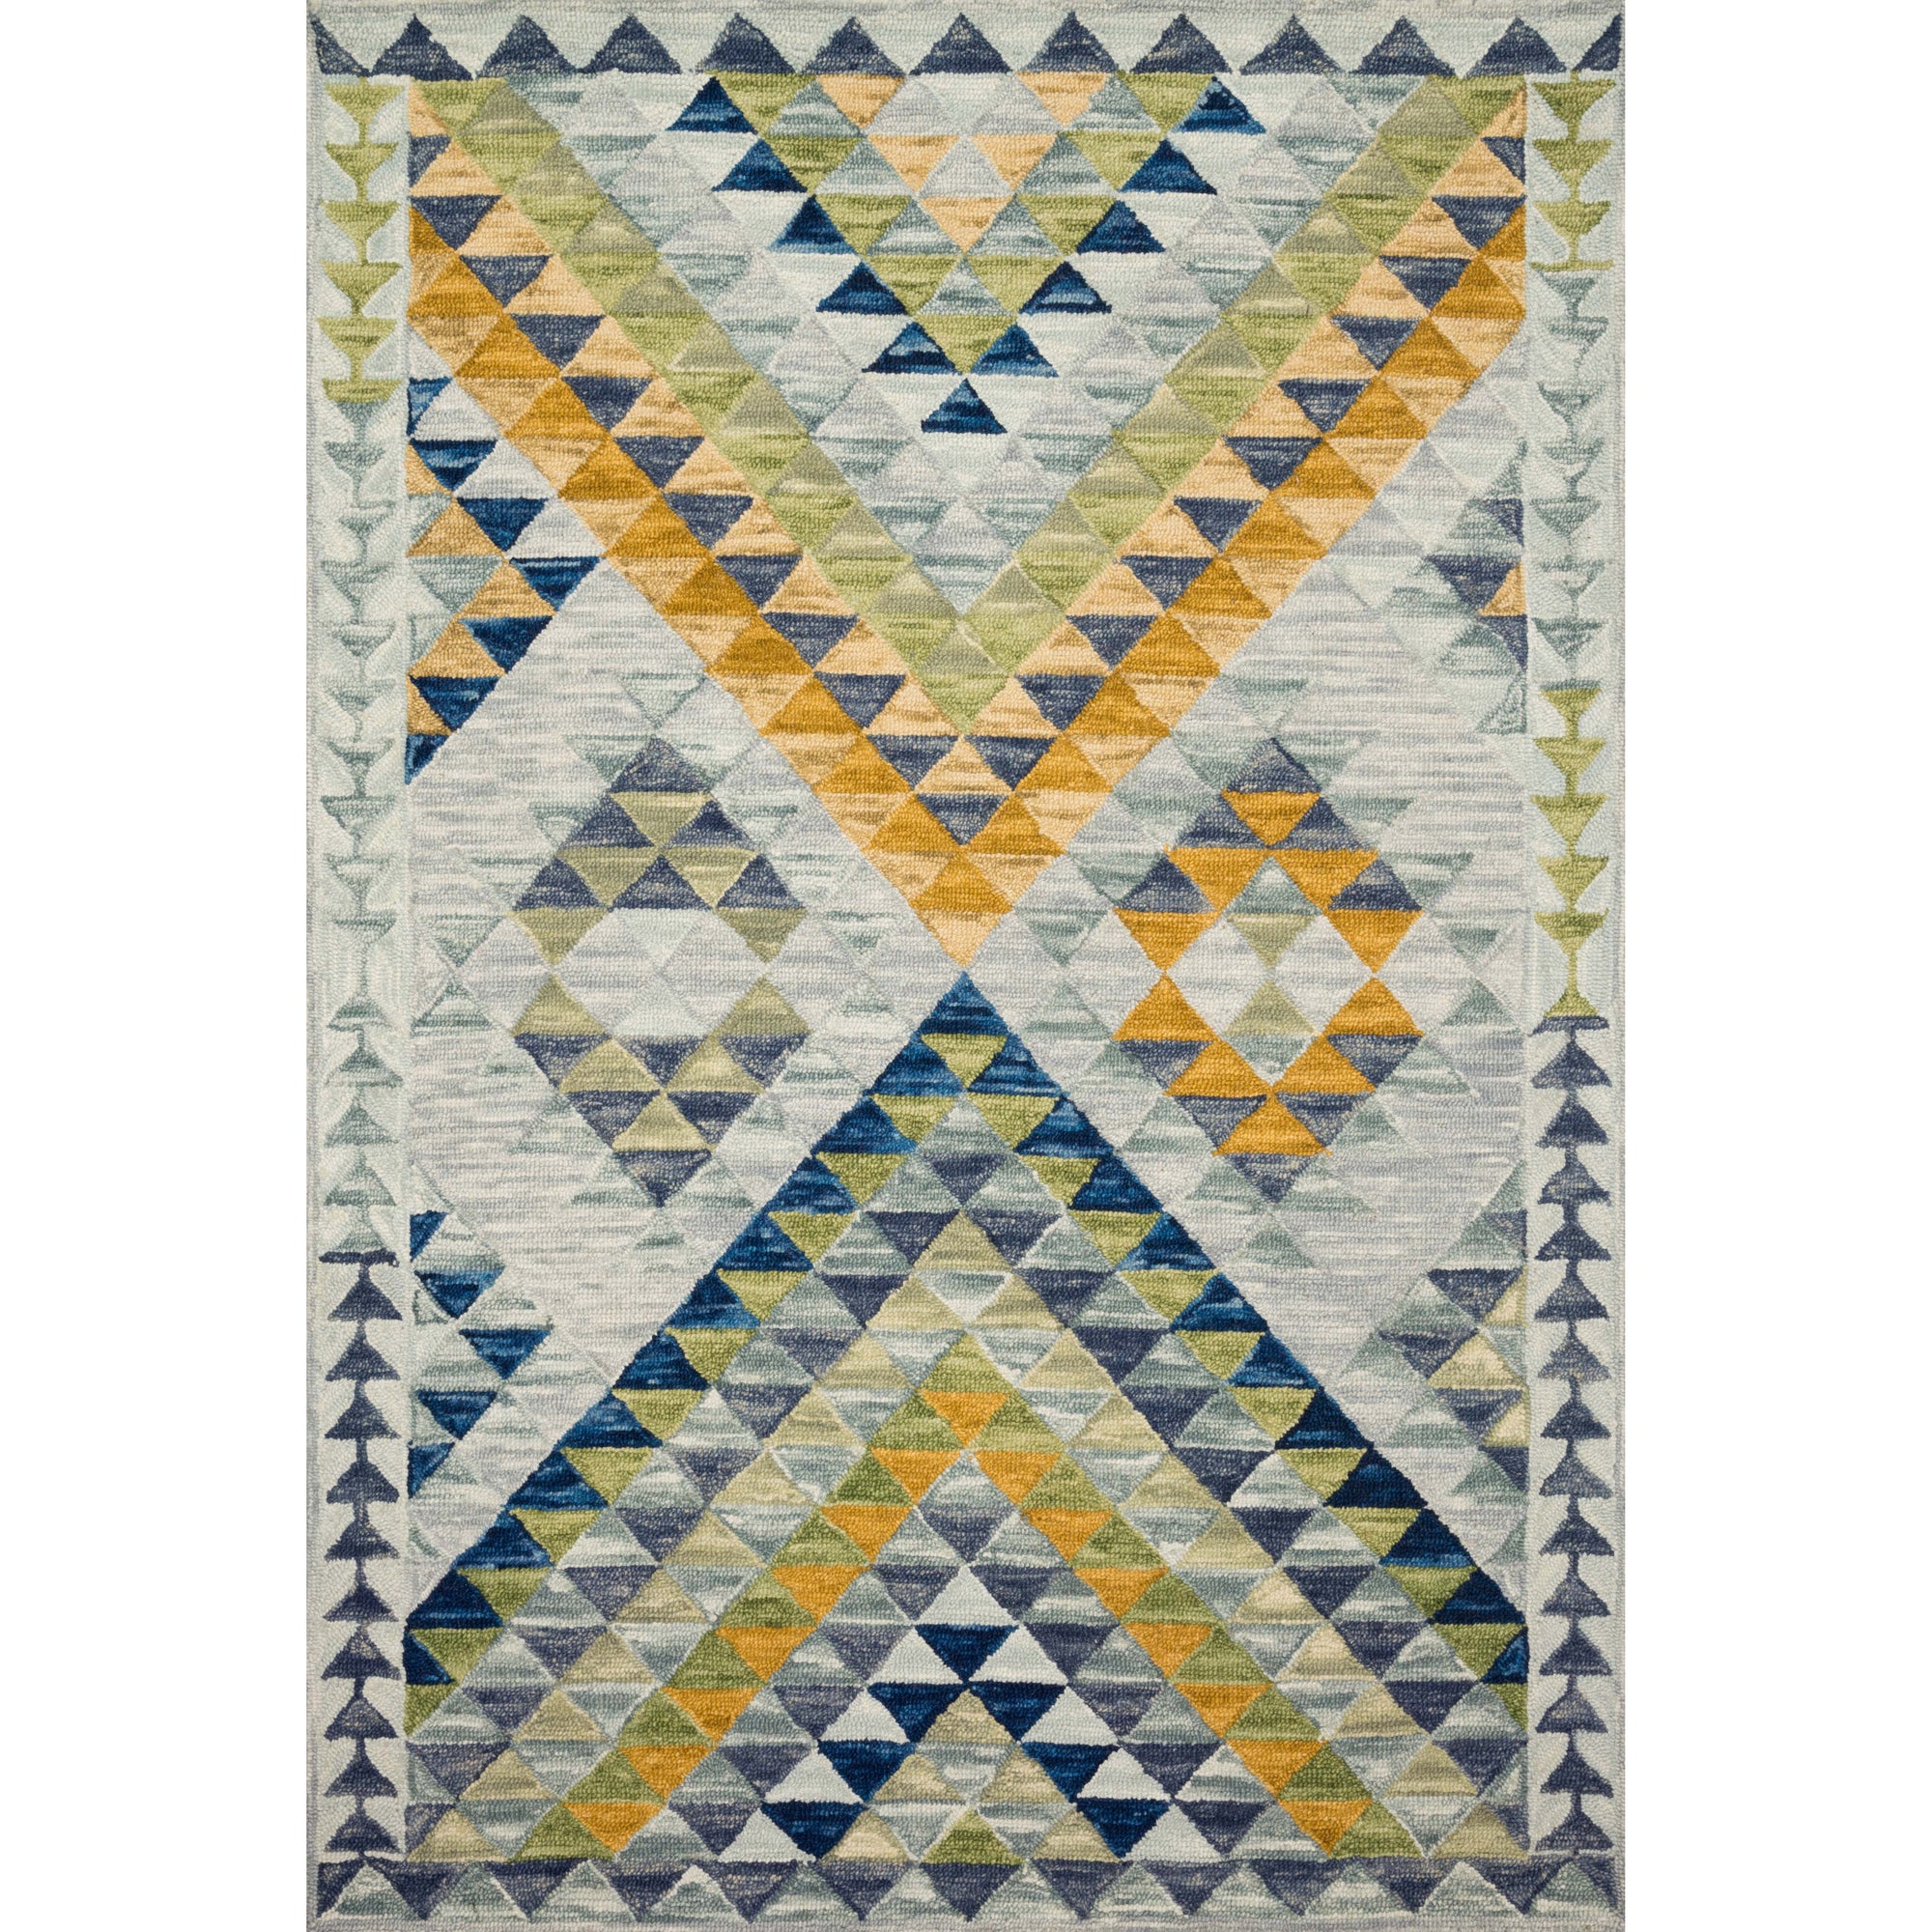 Rugs by Roo Loloi Hallu Spa Gold Area Rug in size 18" x 18" Sample